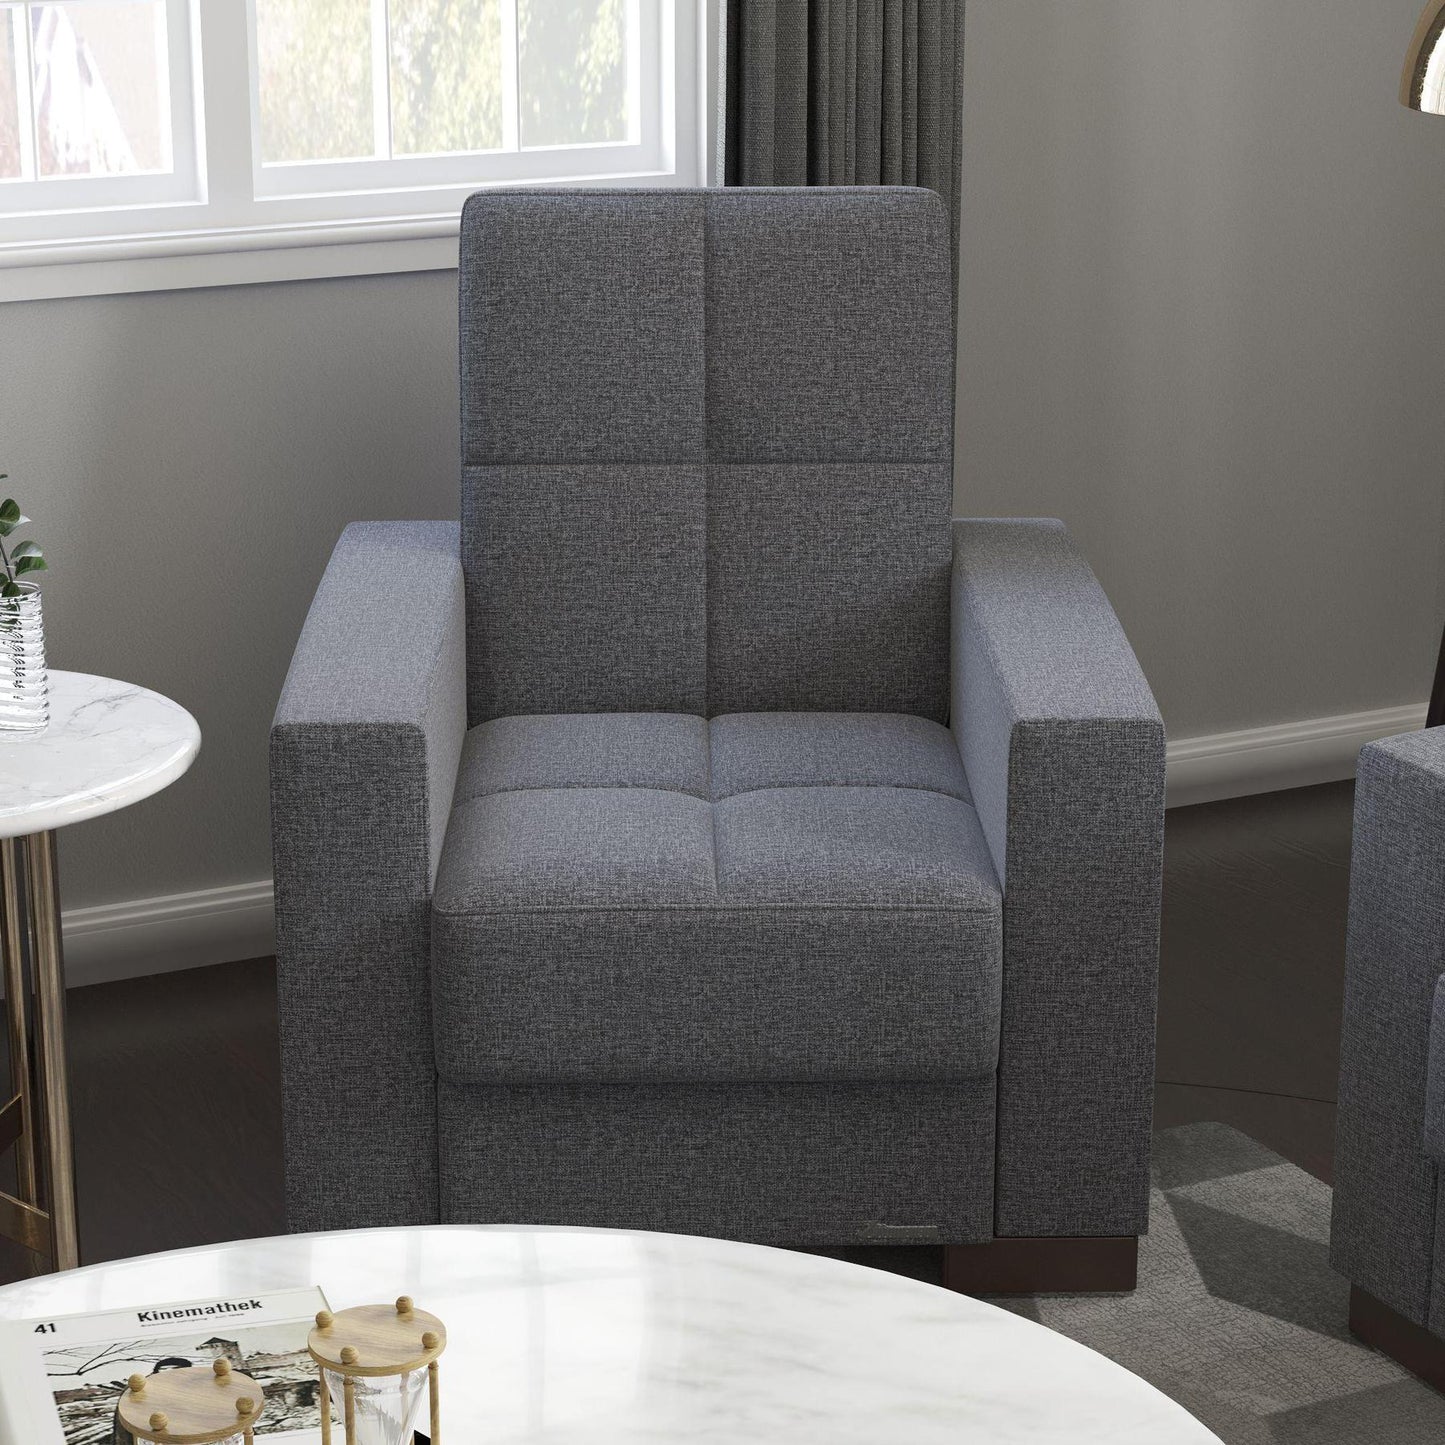 Modern design, Salt and Pepper Gray , Chenille upholstered convertible Armchair with underseat storage from Voyage Track by Ottomanson in living room lifestyle setting by itself. This Armchair measures 38 inches width by 36 inches depth by 41 inches height.